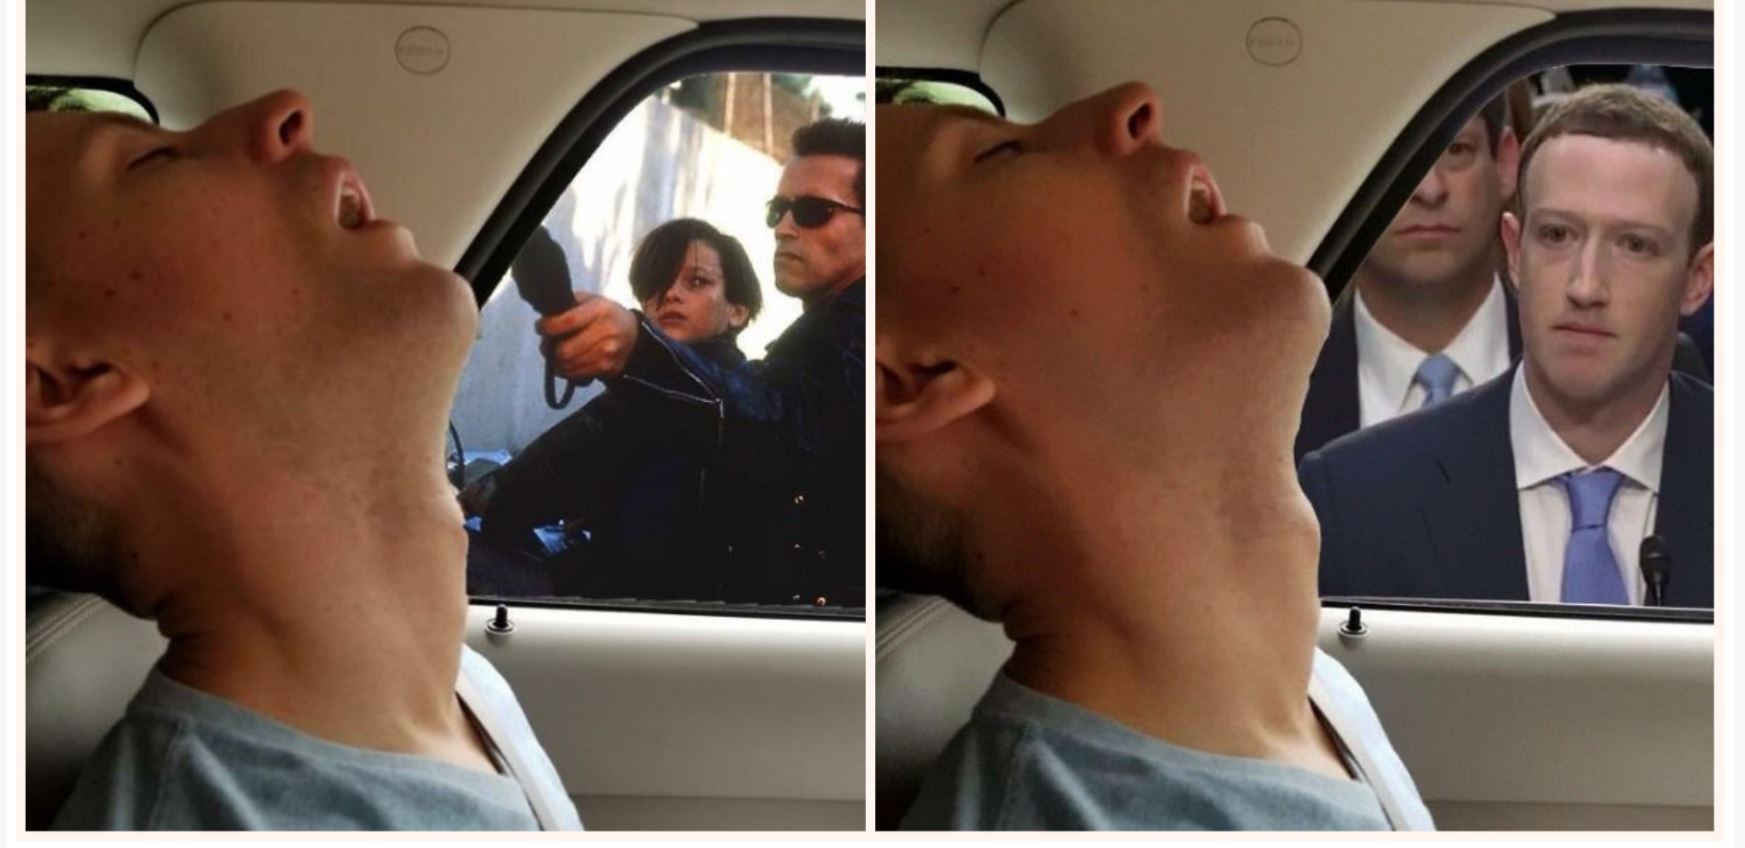 Bloke falls asleep on road trip, missus gets Internet to Photoshop what he missed